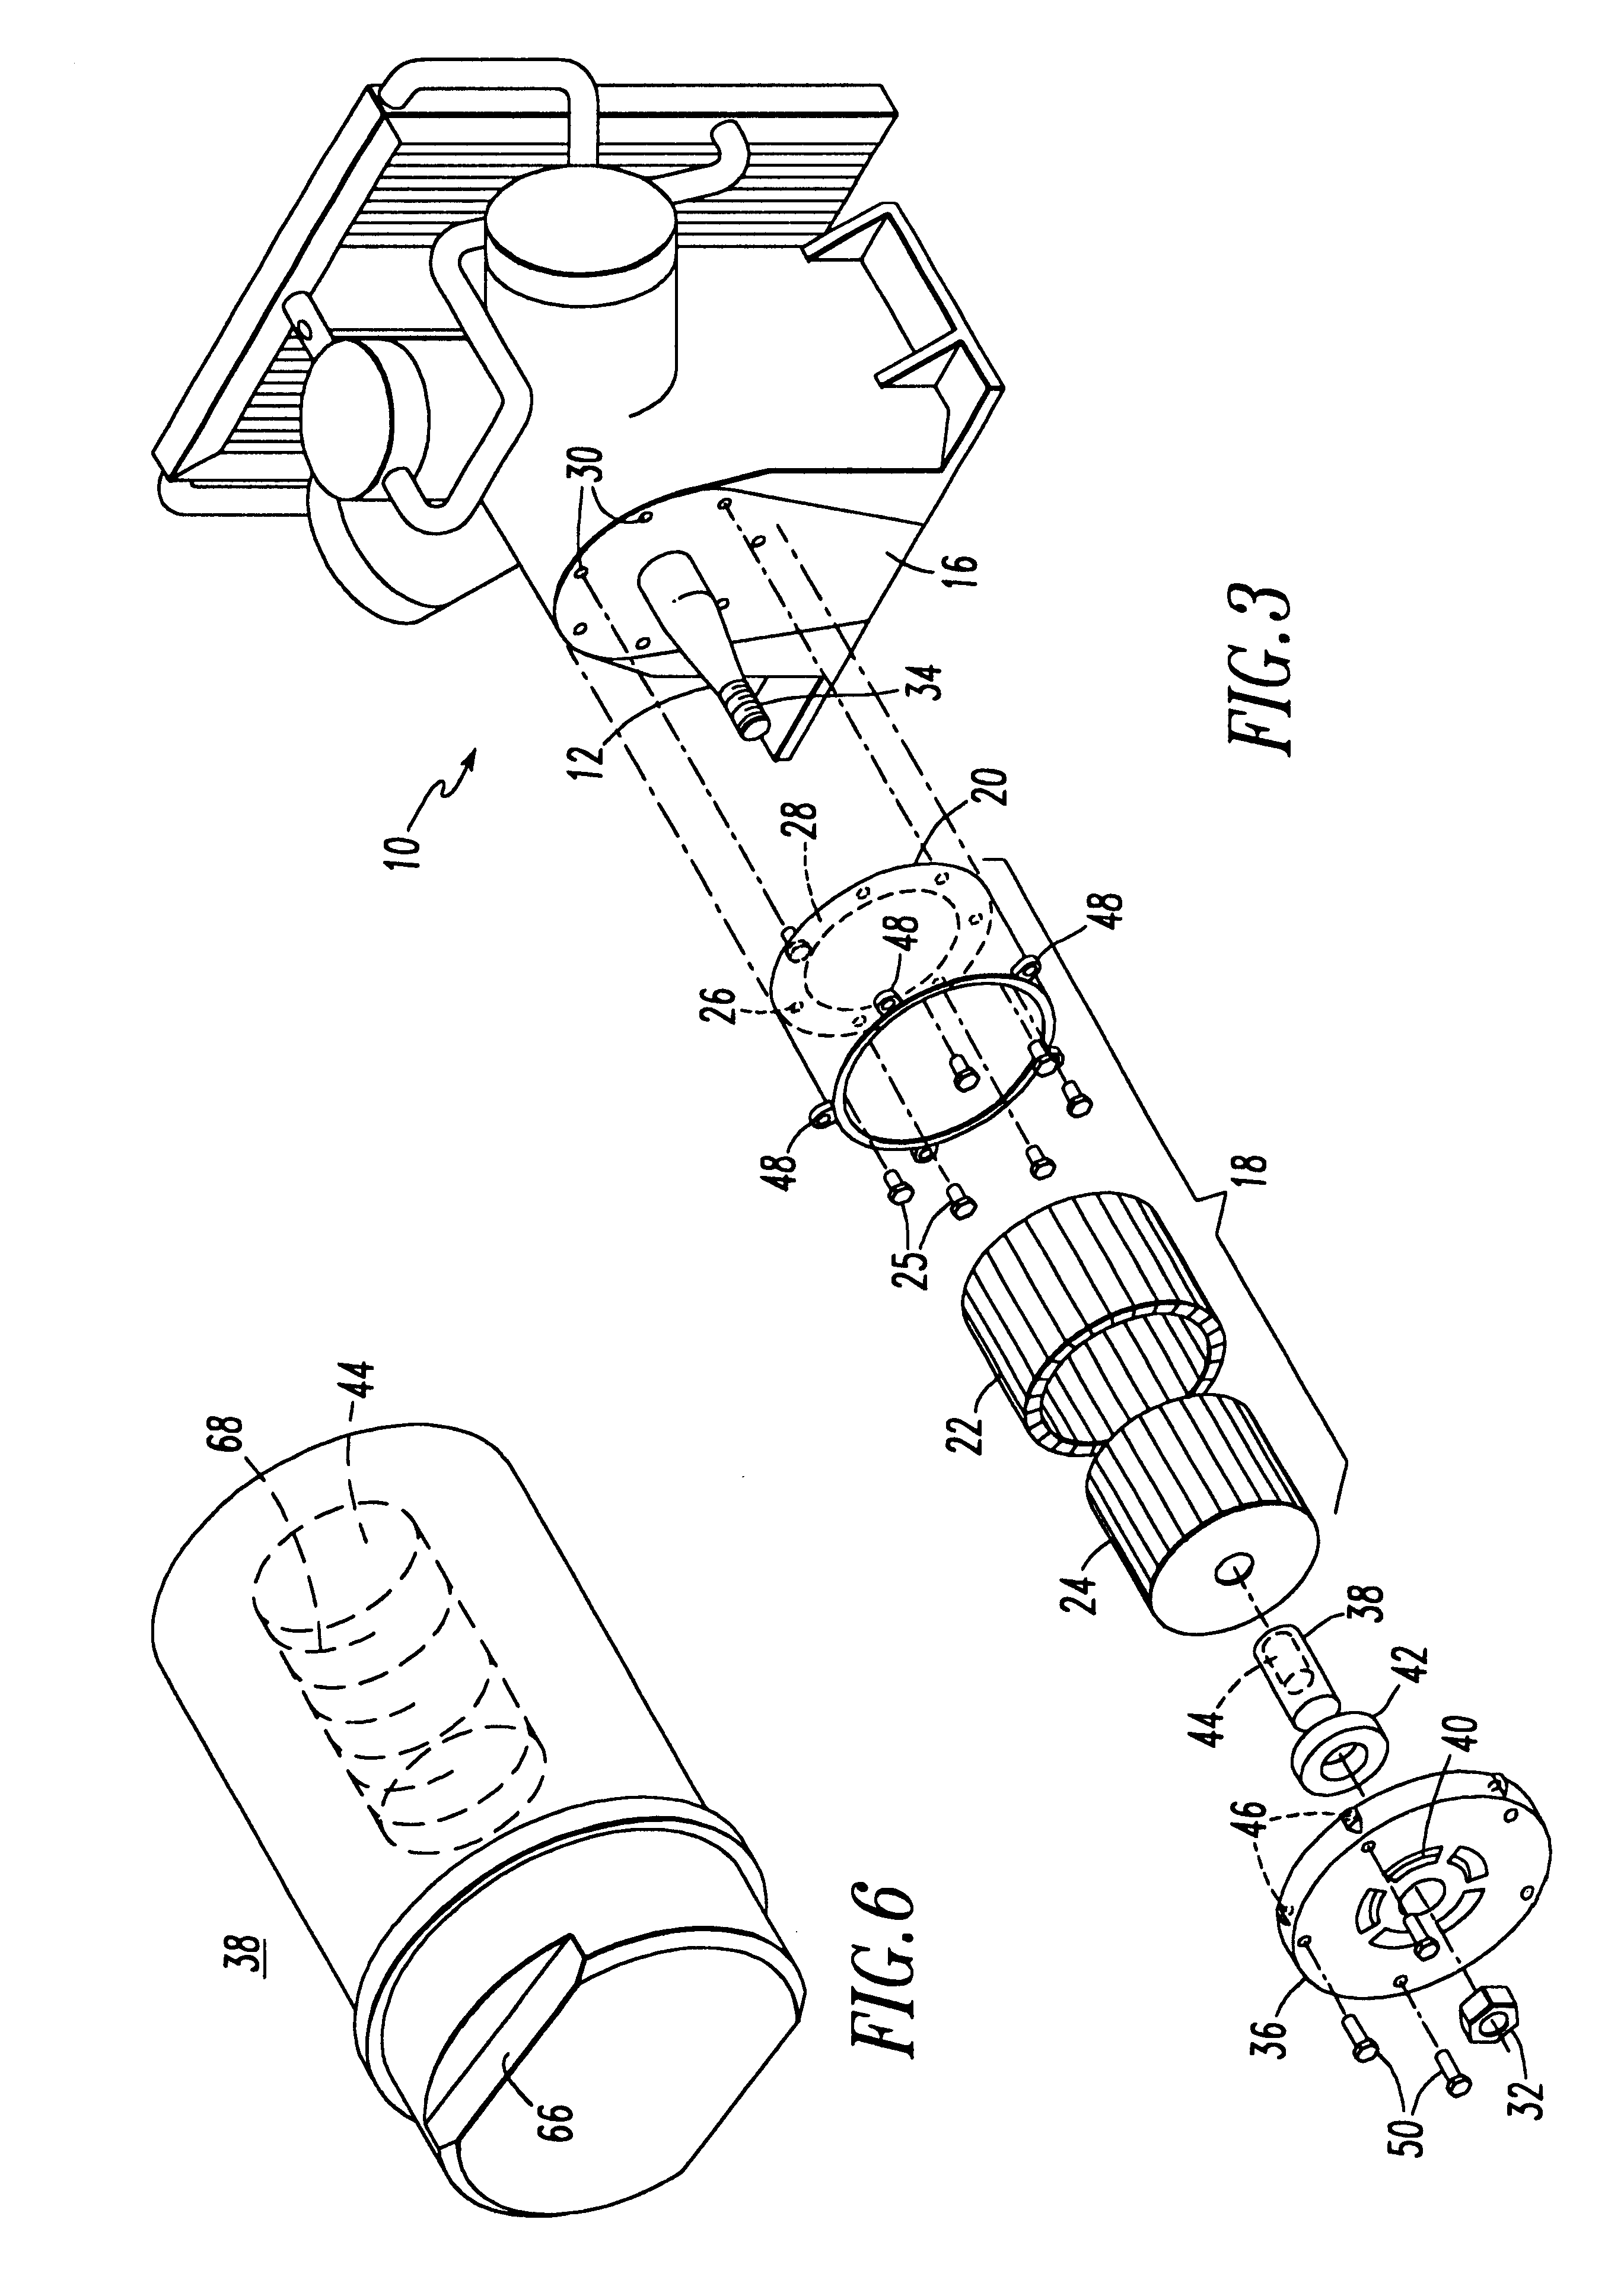 Shaft extension for use with outboard bearing designs